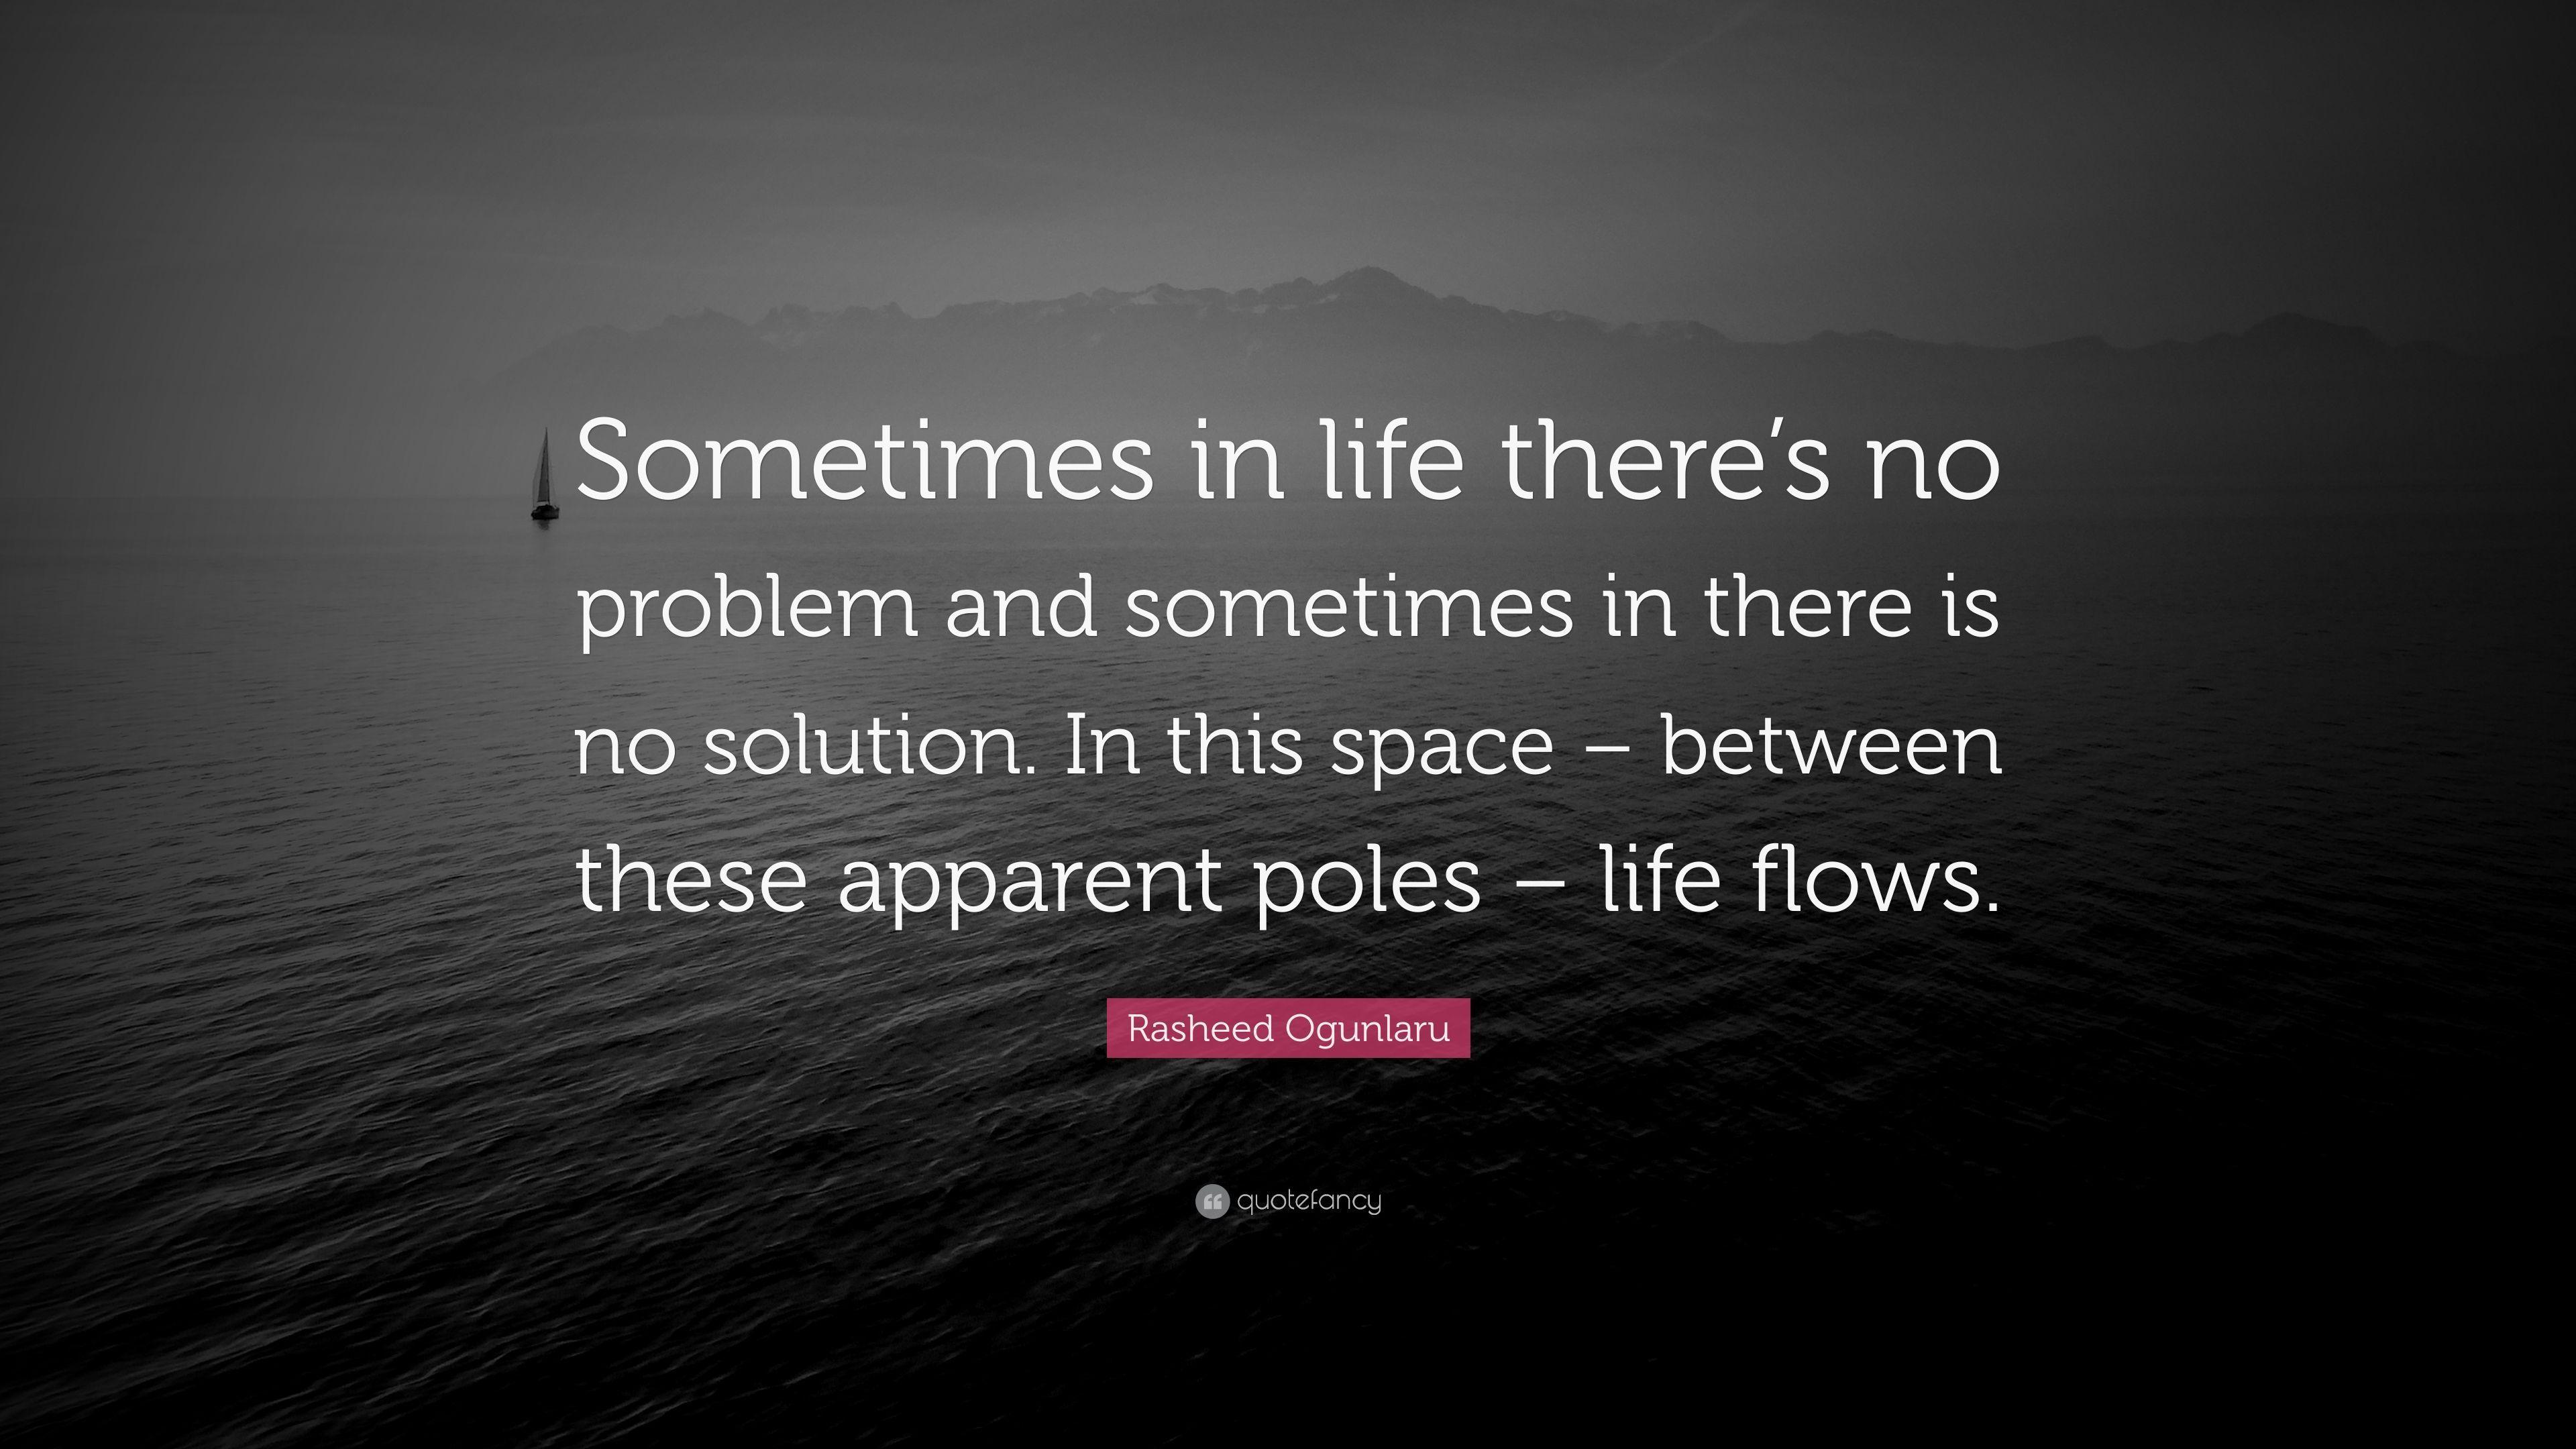 Rasheed Ogunlaru Quote: “Sometimes in life there's no problem